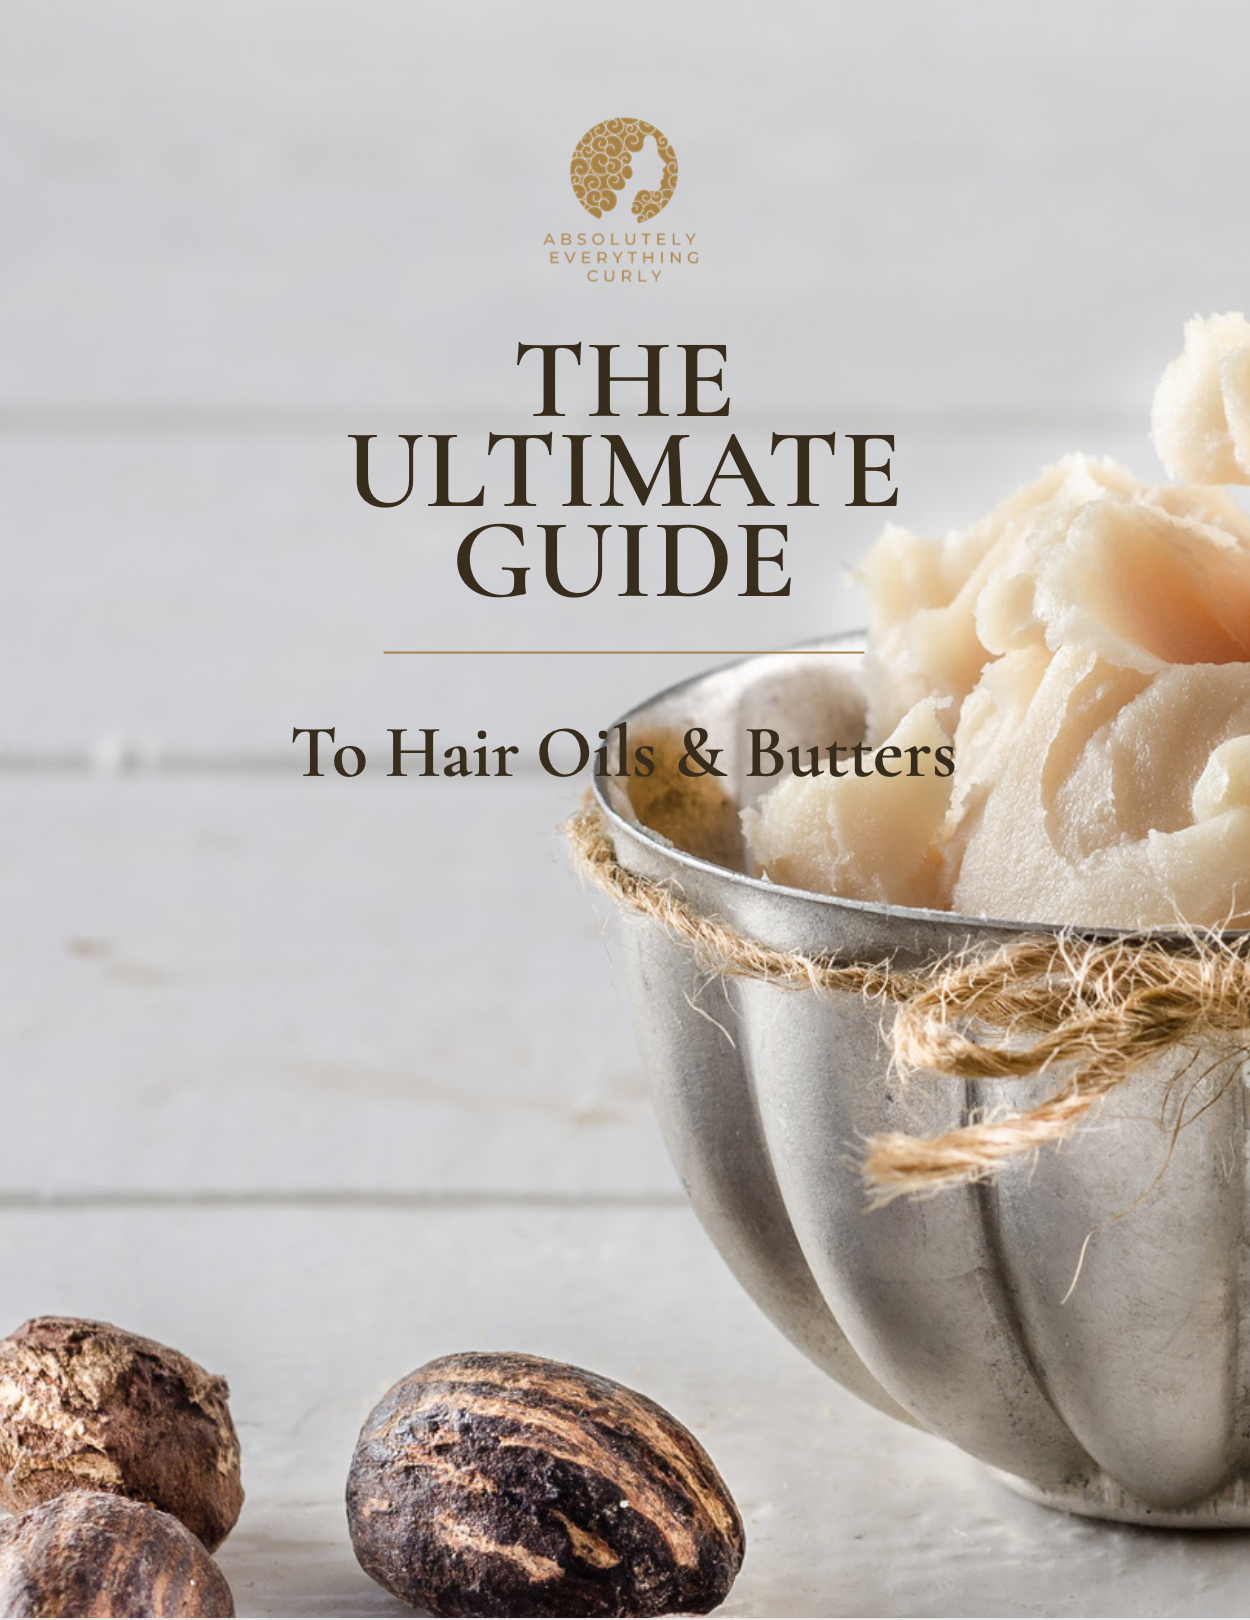 The Ultimate Guide to Hair oils and butters